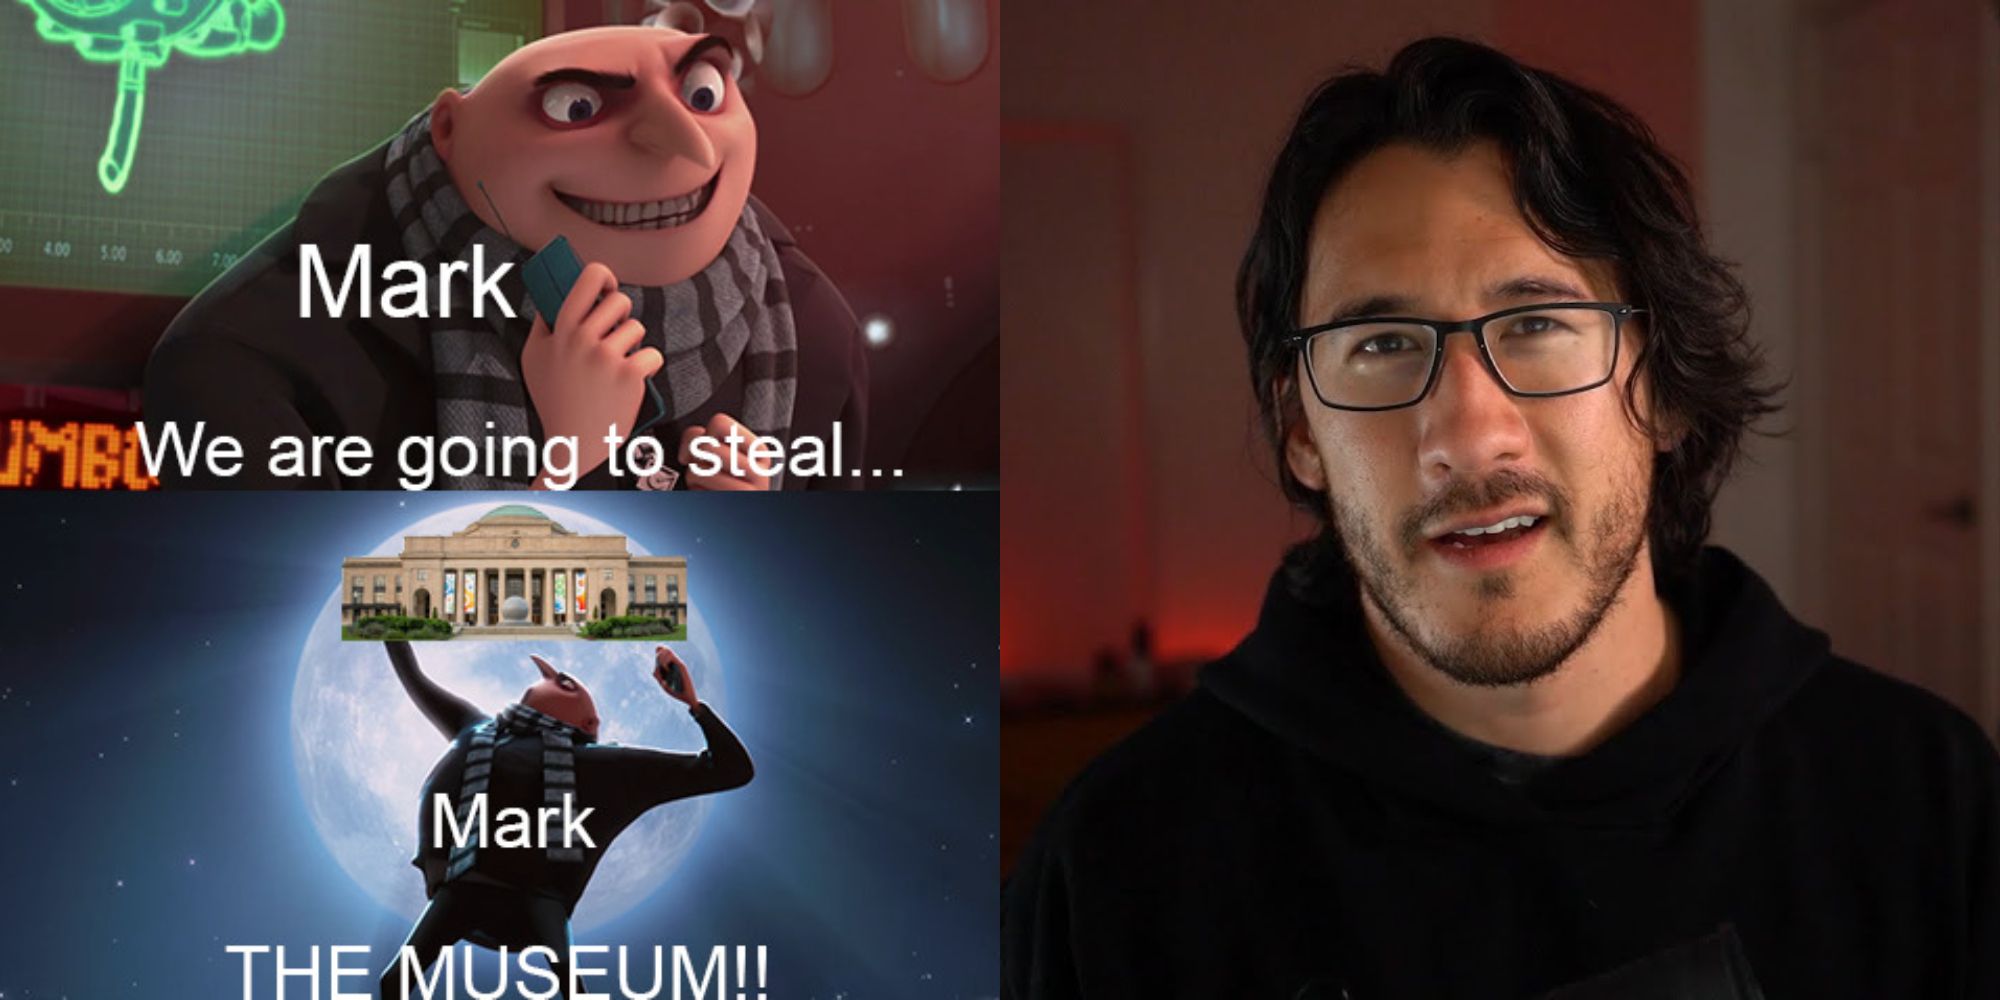 10 Markiplier Memes That Perfectly Sum Up His Channel